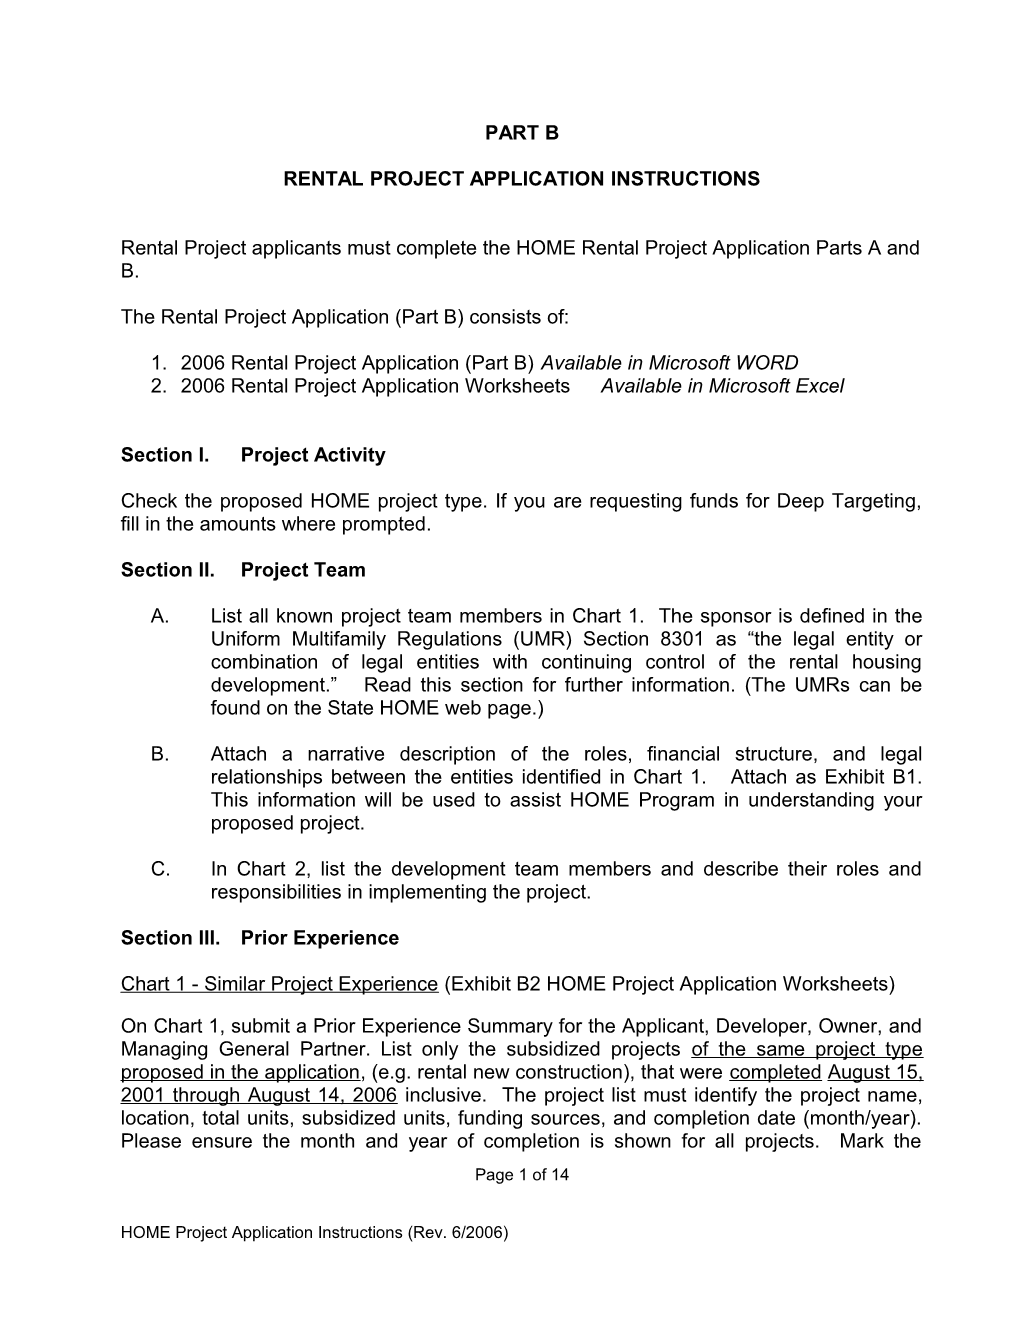 Rental Project Application Instructions